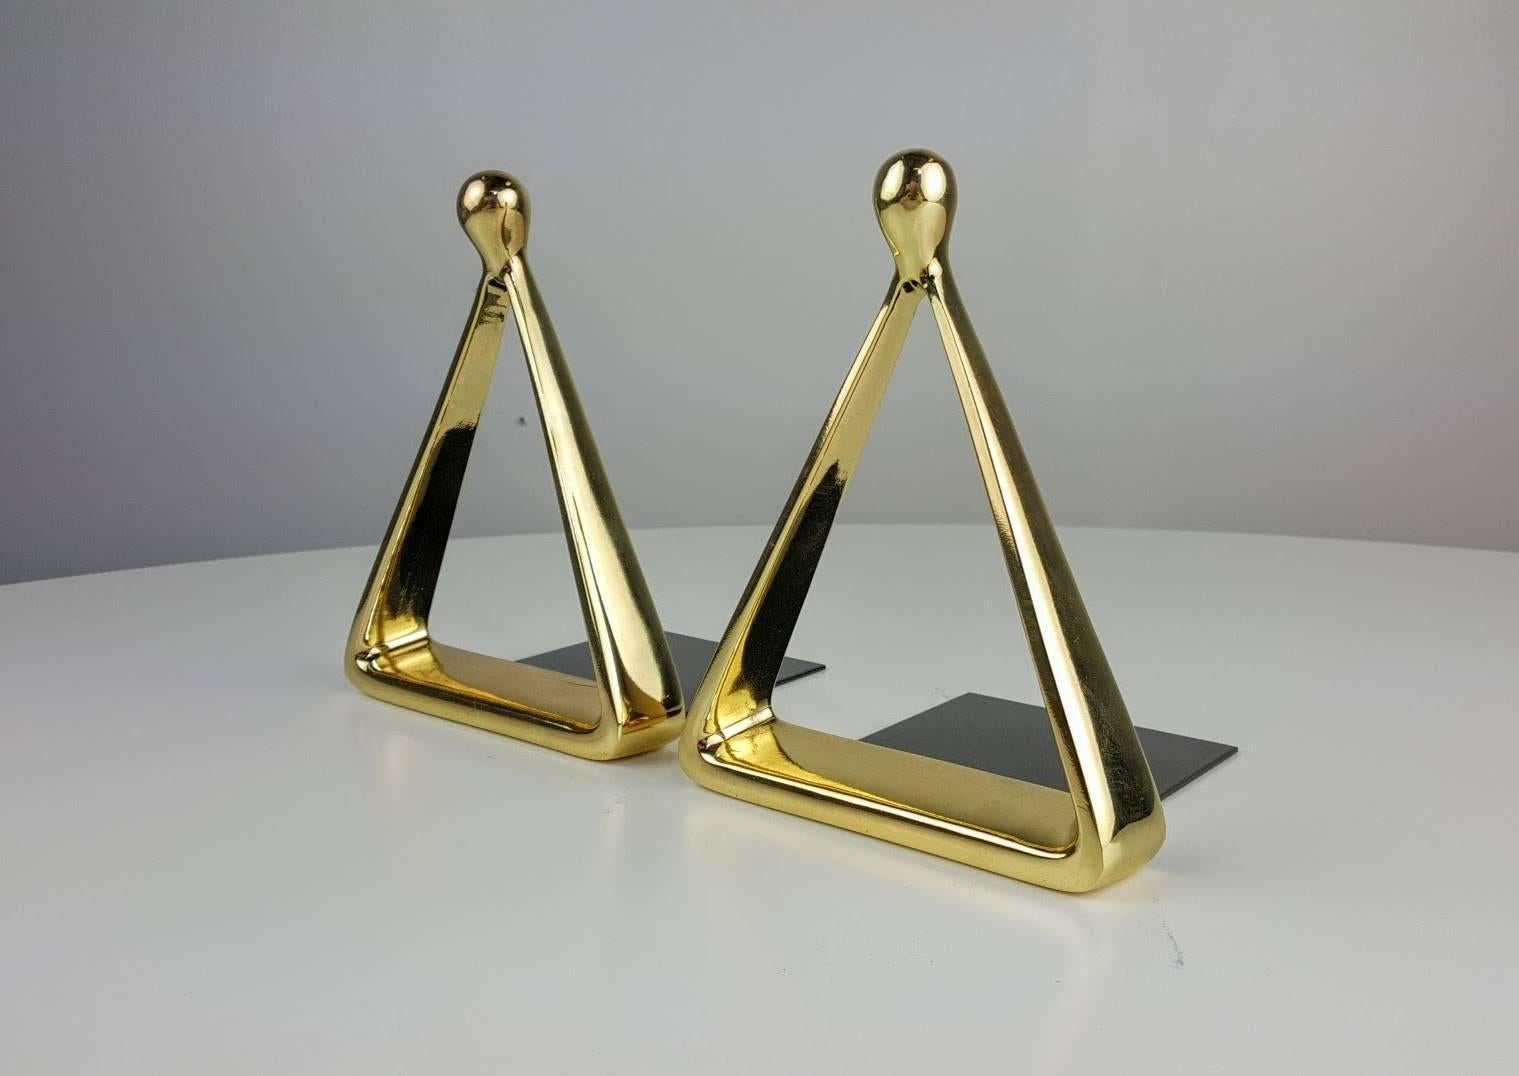 Pristine pair of brass stirrup bookends by Ben Seibel for Jenfred Ware, 1950s. These bookends are a rare design. They have been fully restored. In excellent condition. Truly gorgeous.

See this item in our private NYC showroom! Refine Limited is